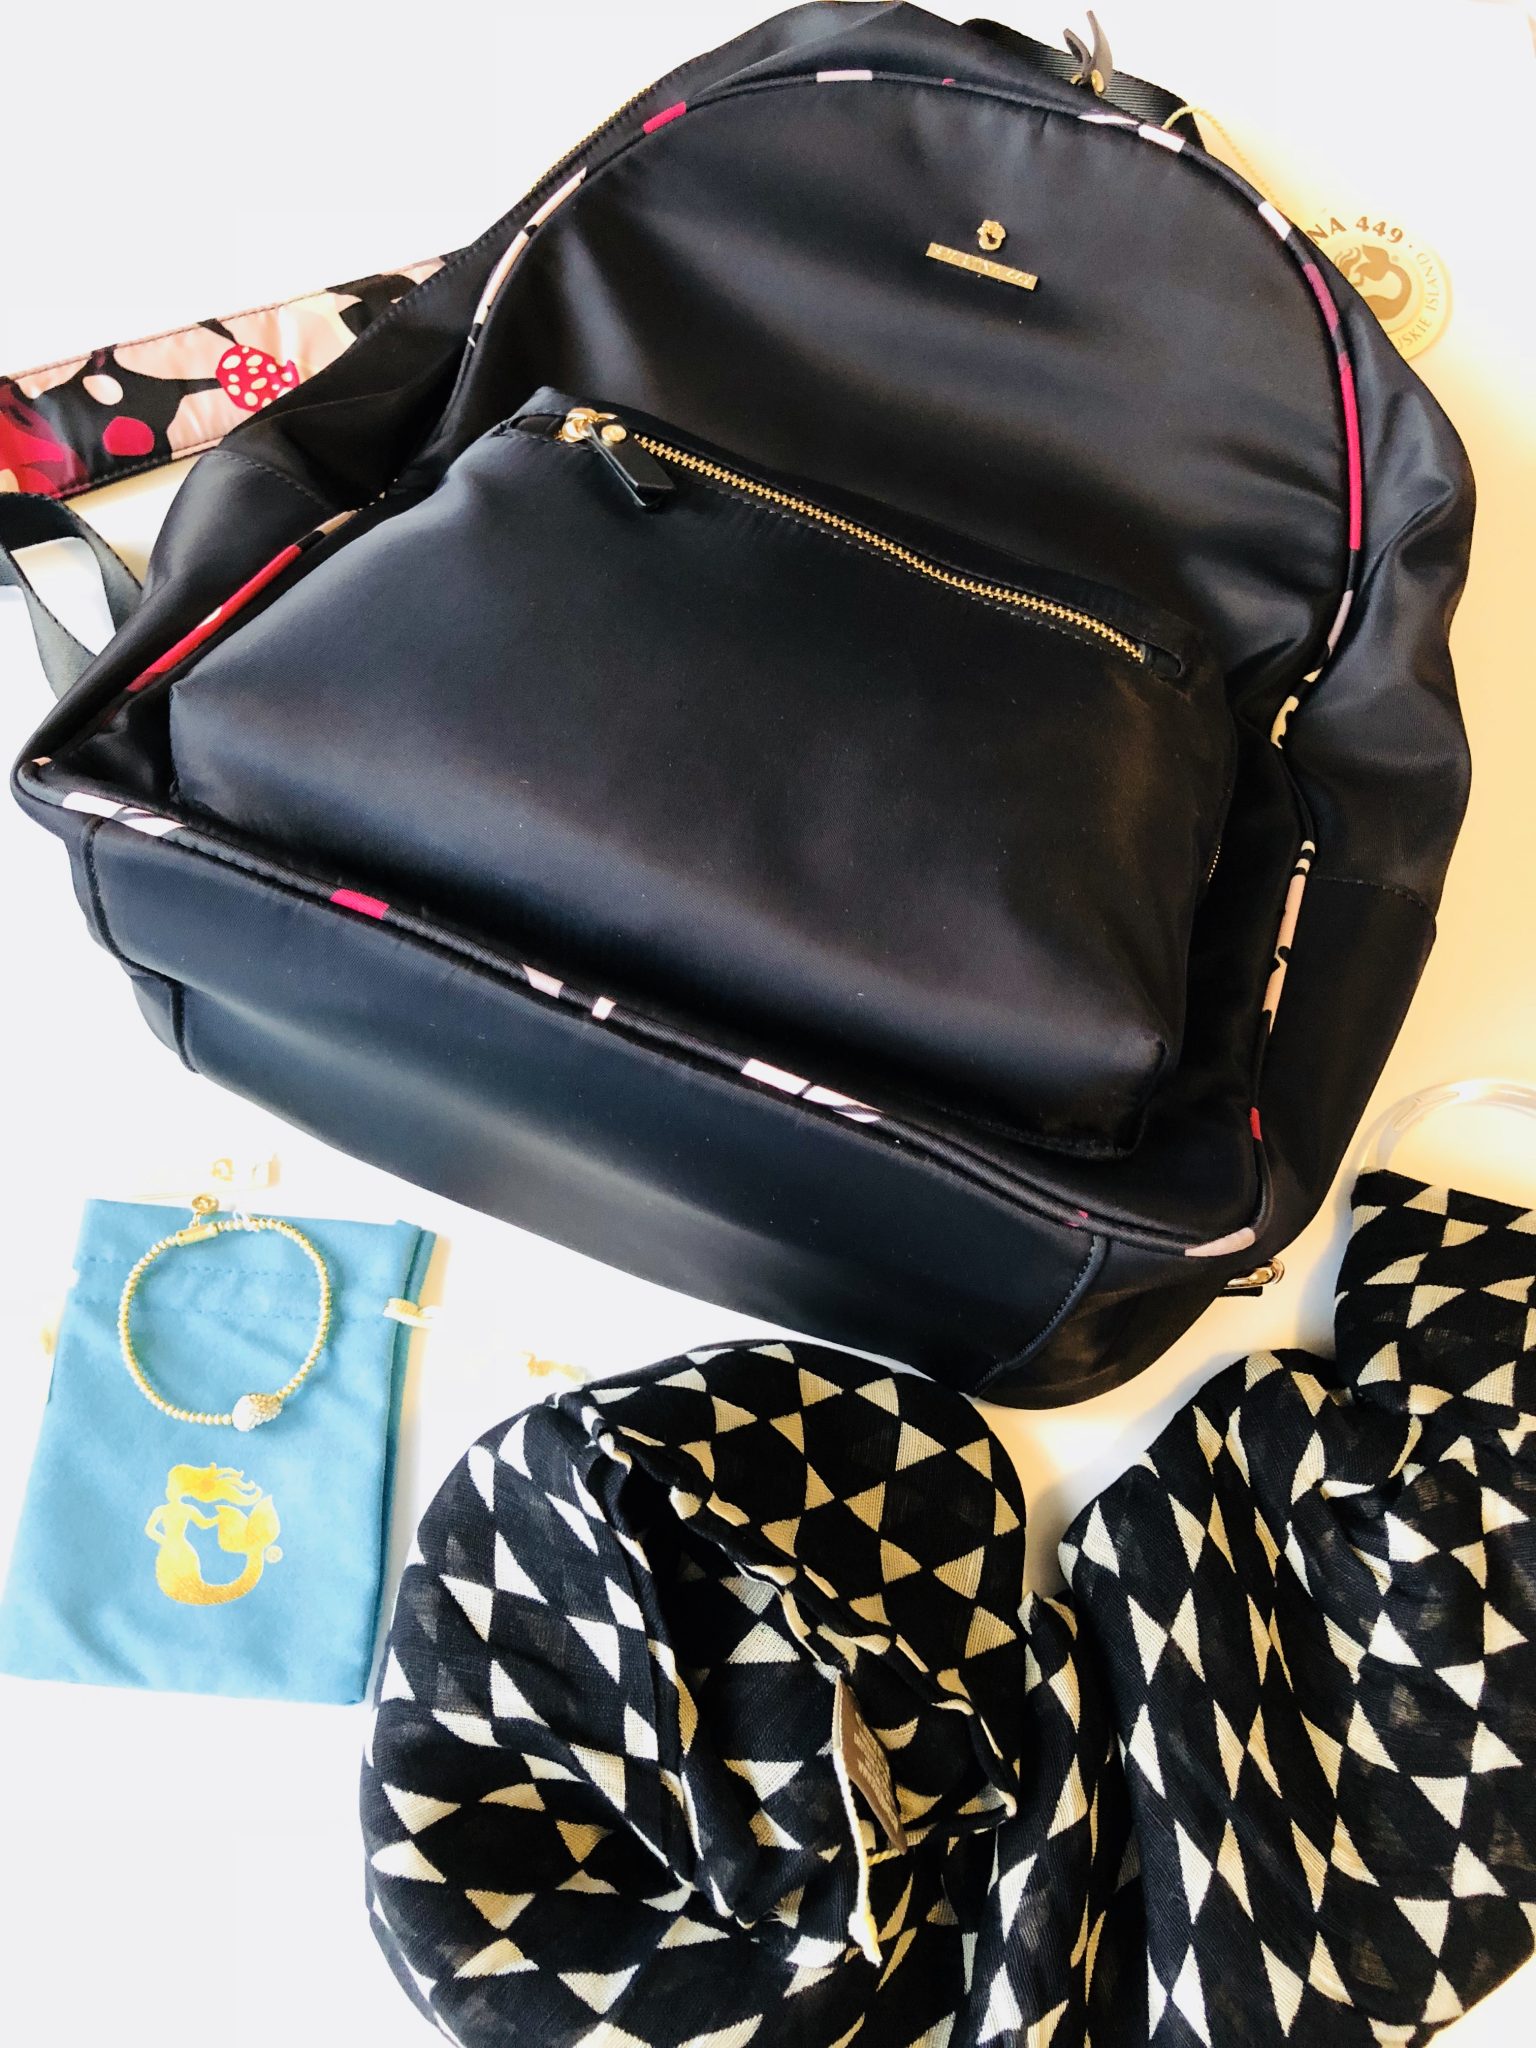 void Amuse alcohol What's In My Bag: Spartina 449 Armada Tech Backpack - Talking With Tami